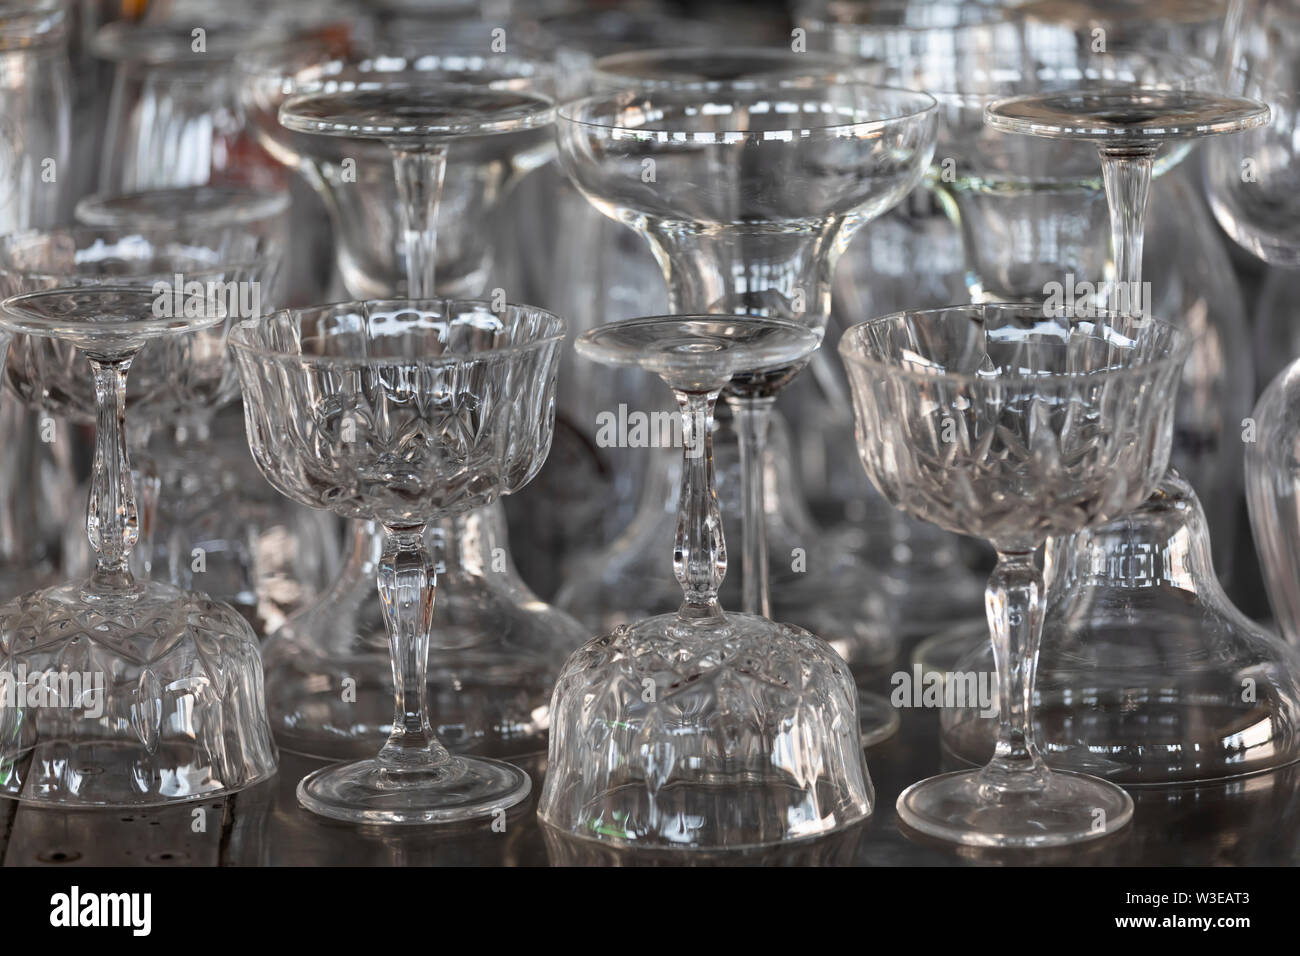 Glassware on a stainless steel hotel bar Stock Photo